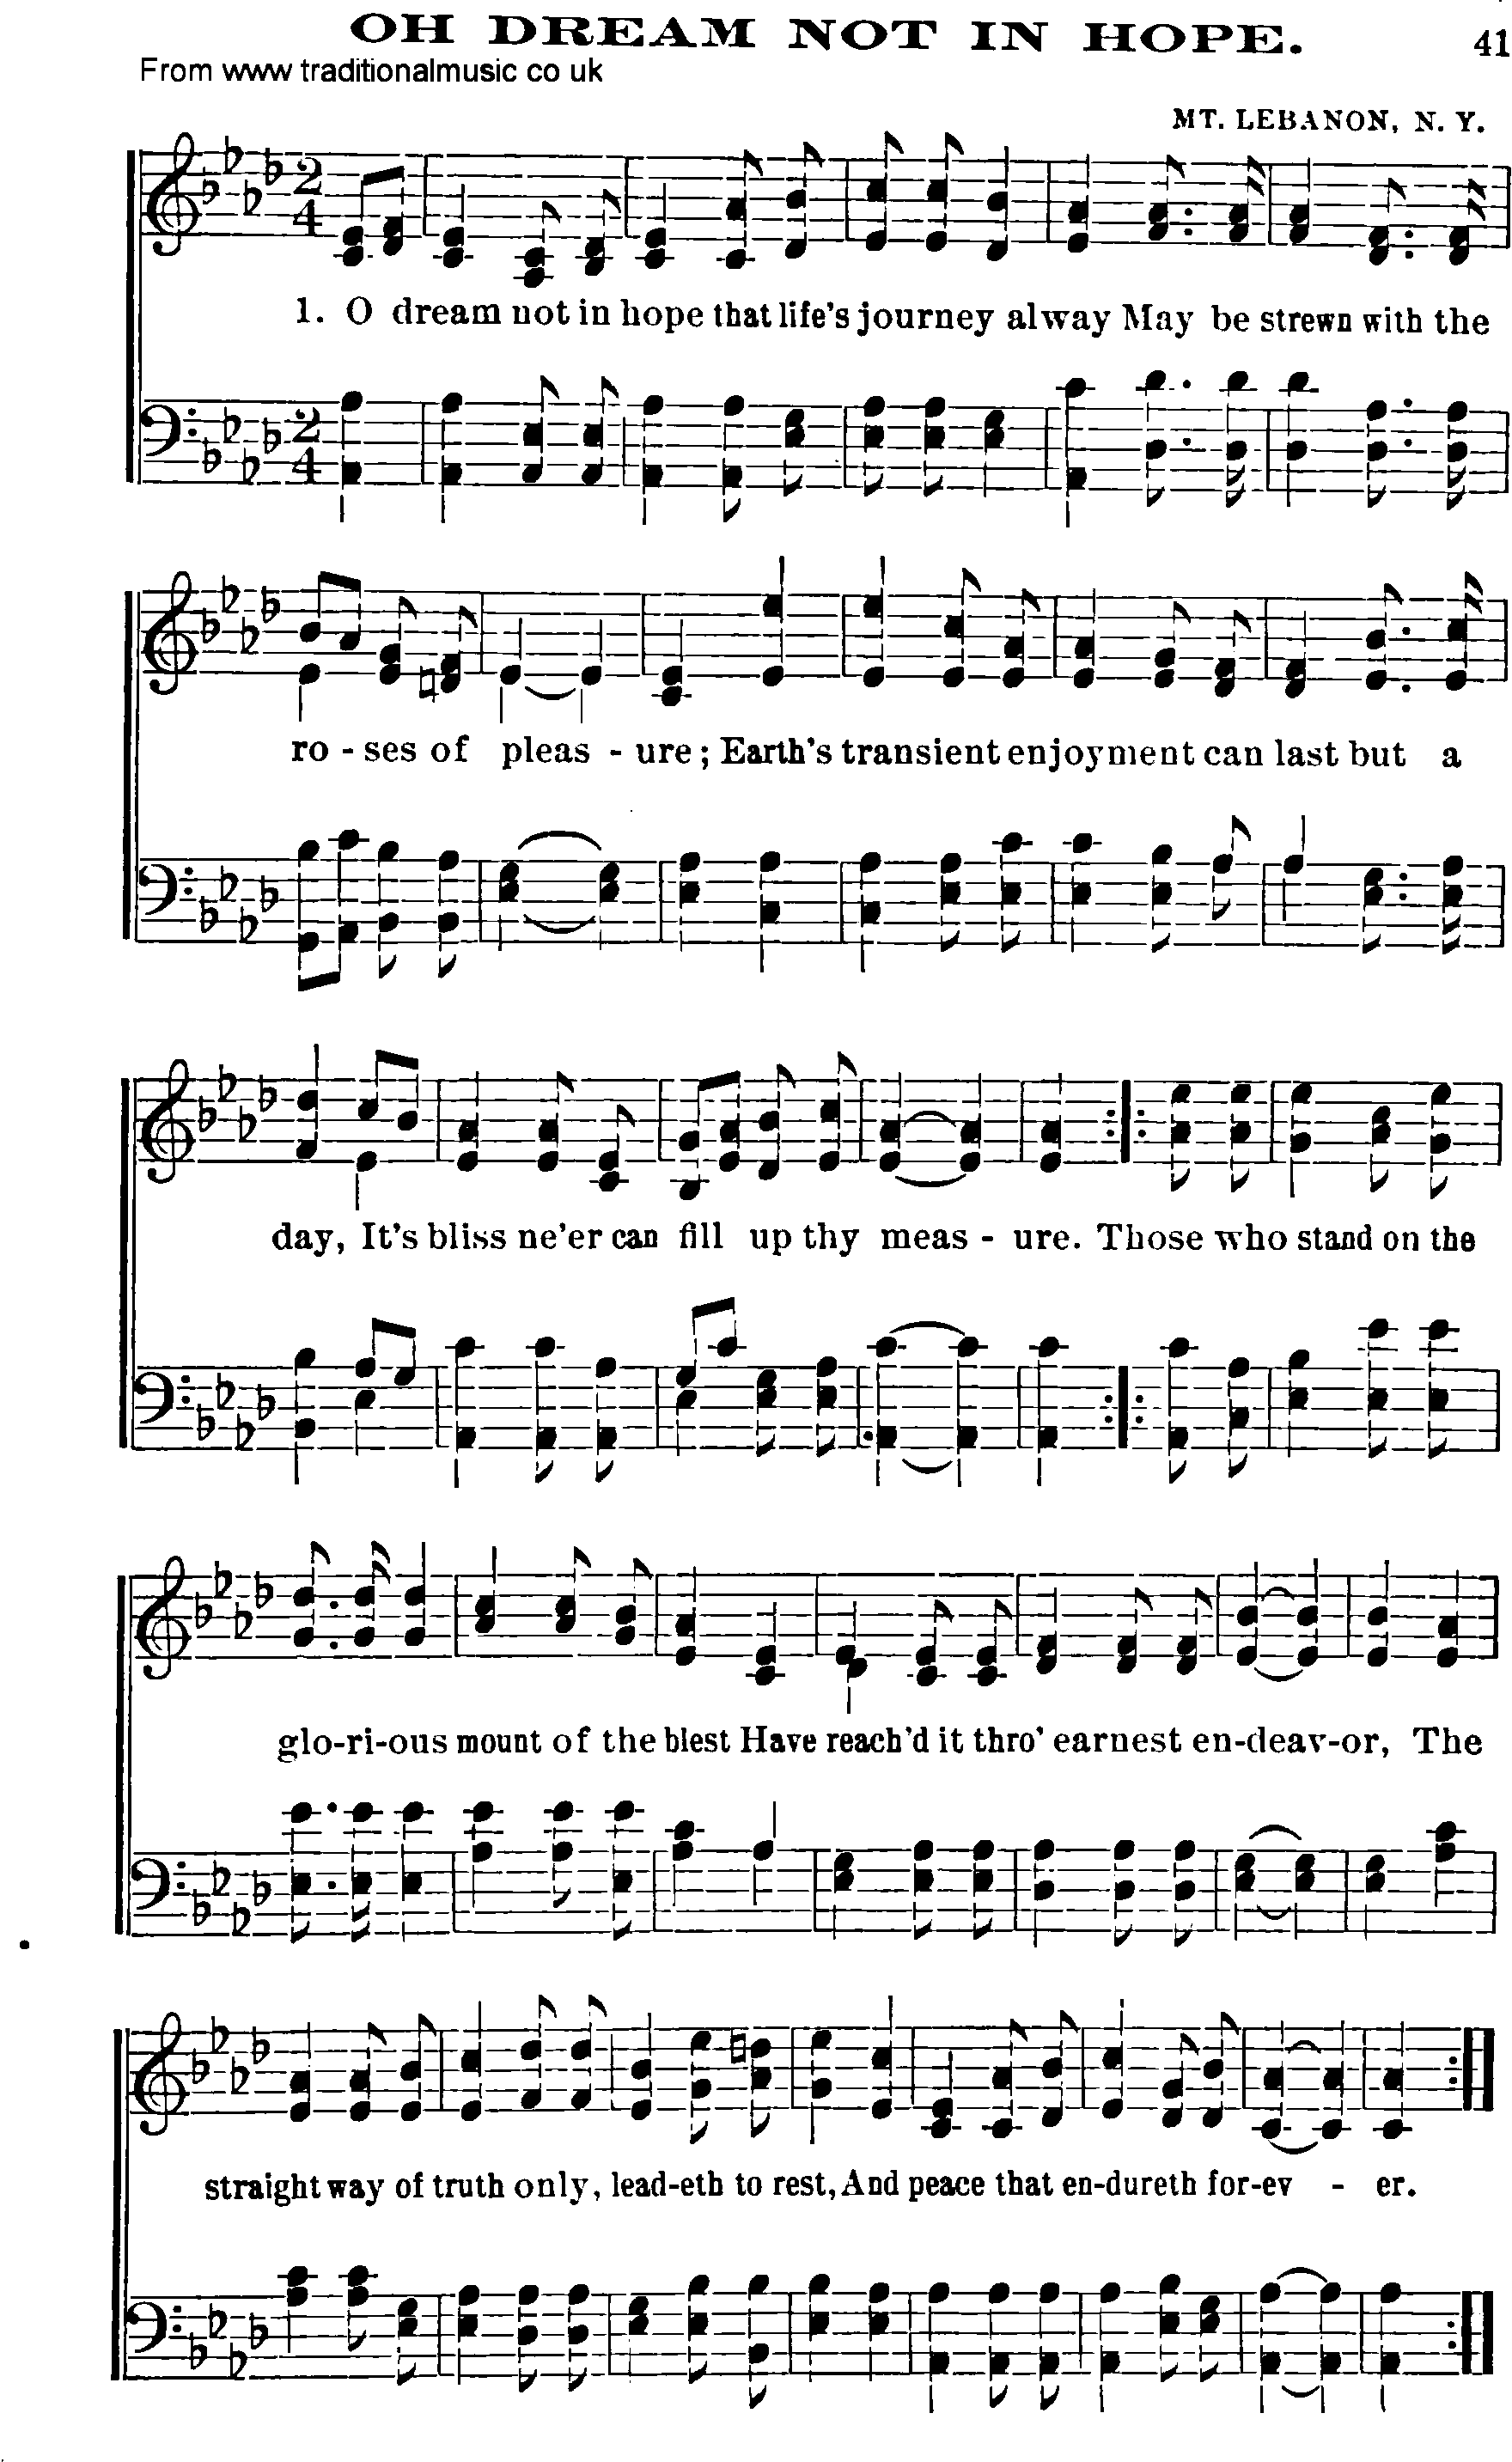 Shaker Music collection, Hymn: oh drem not in hope, sheetmusic and PDF